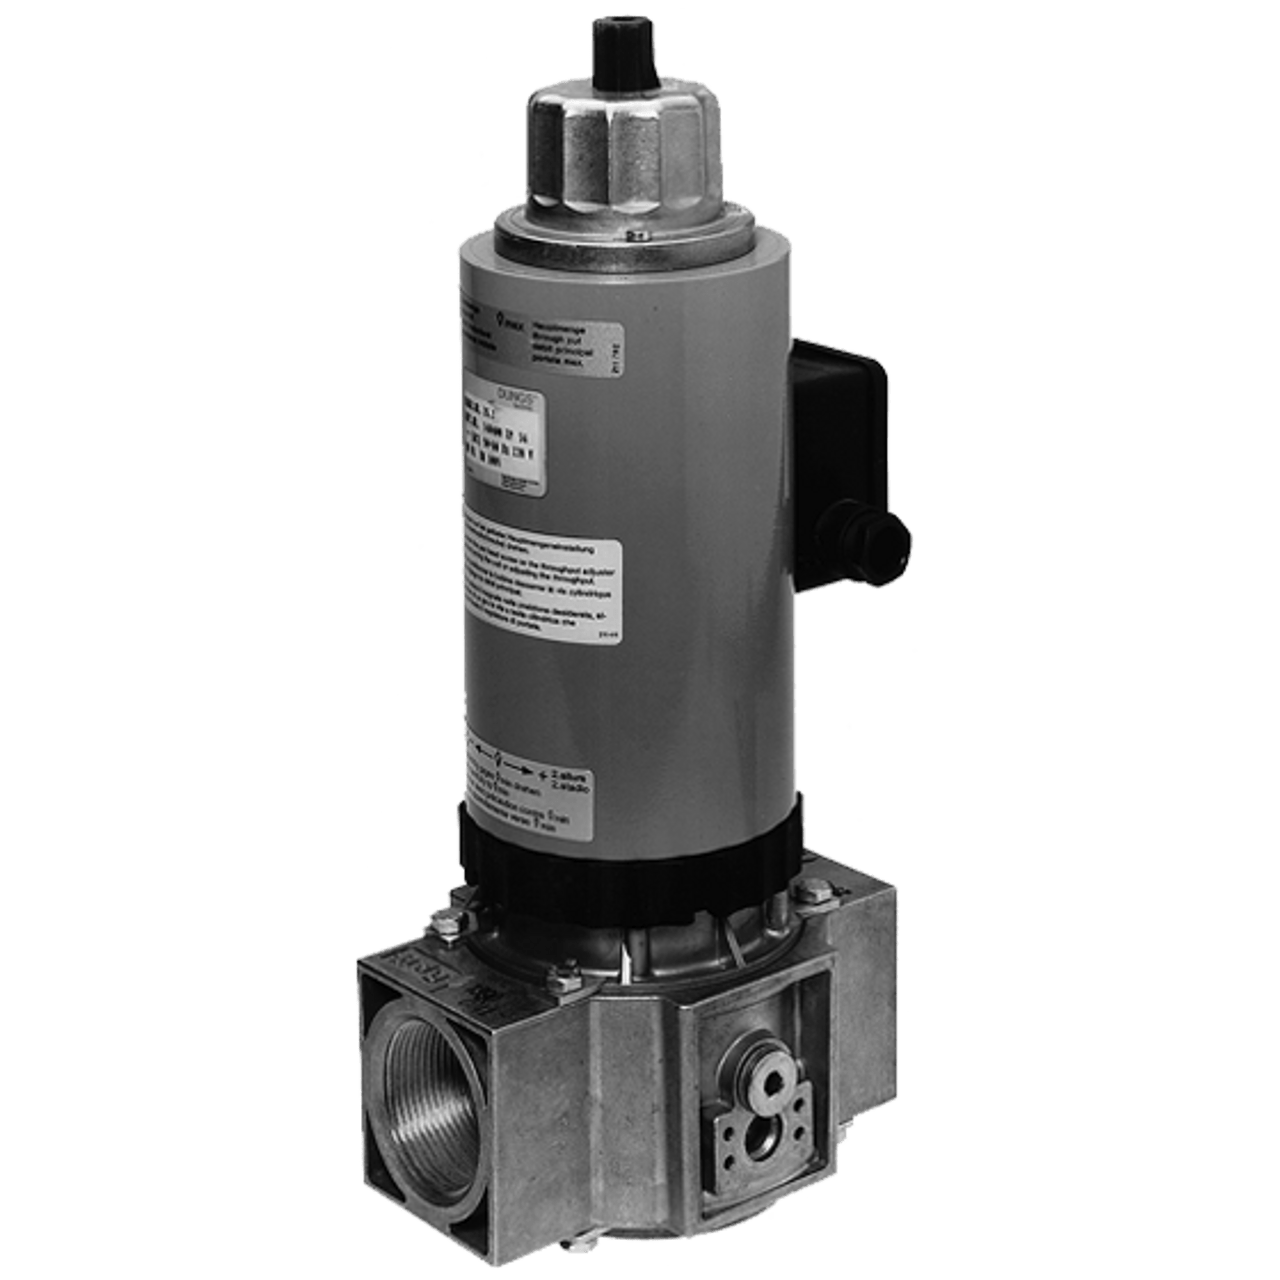 ZRLE 415/5 Magnetic Gas Valve 109959